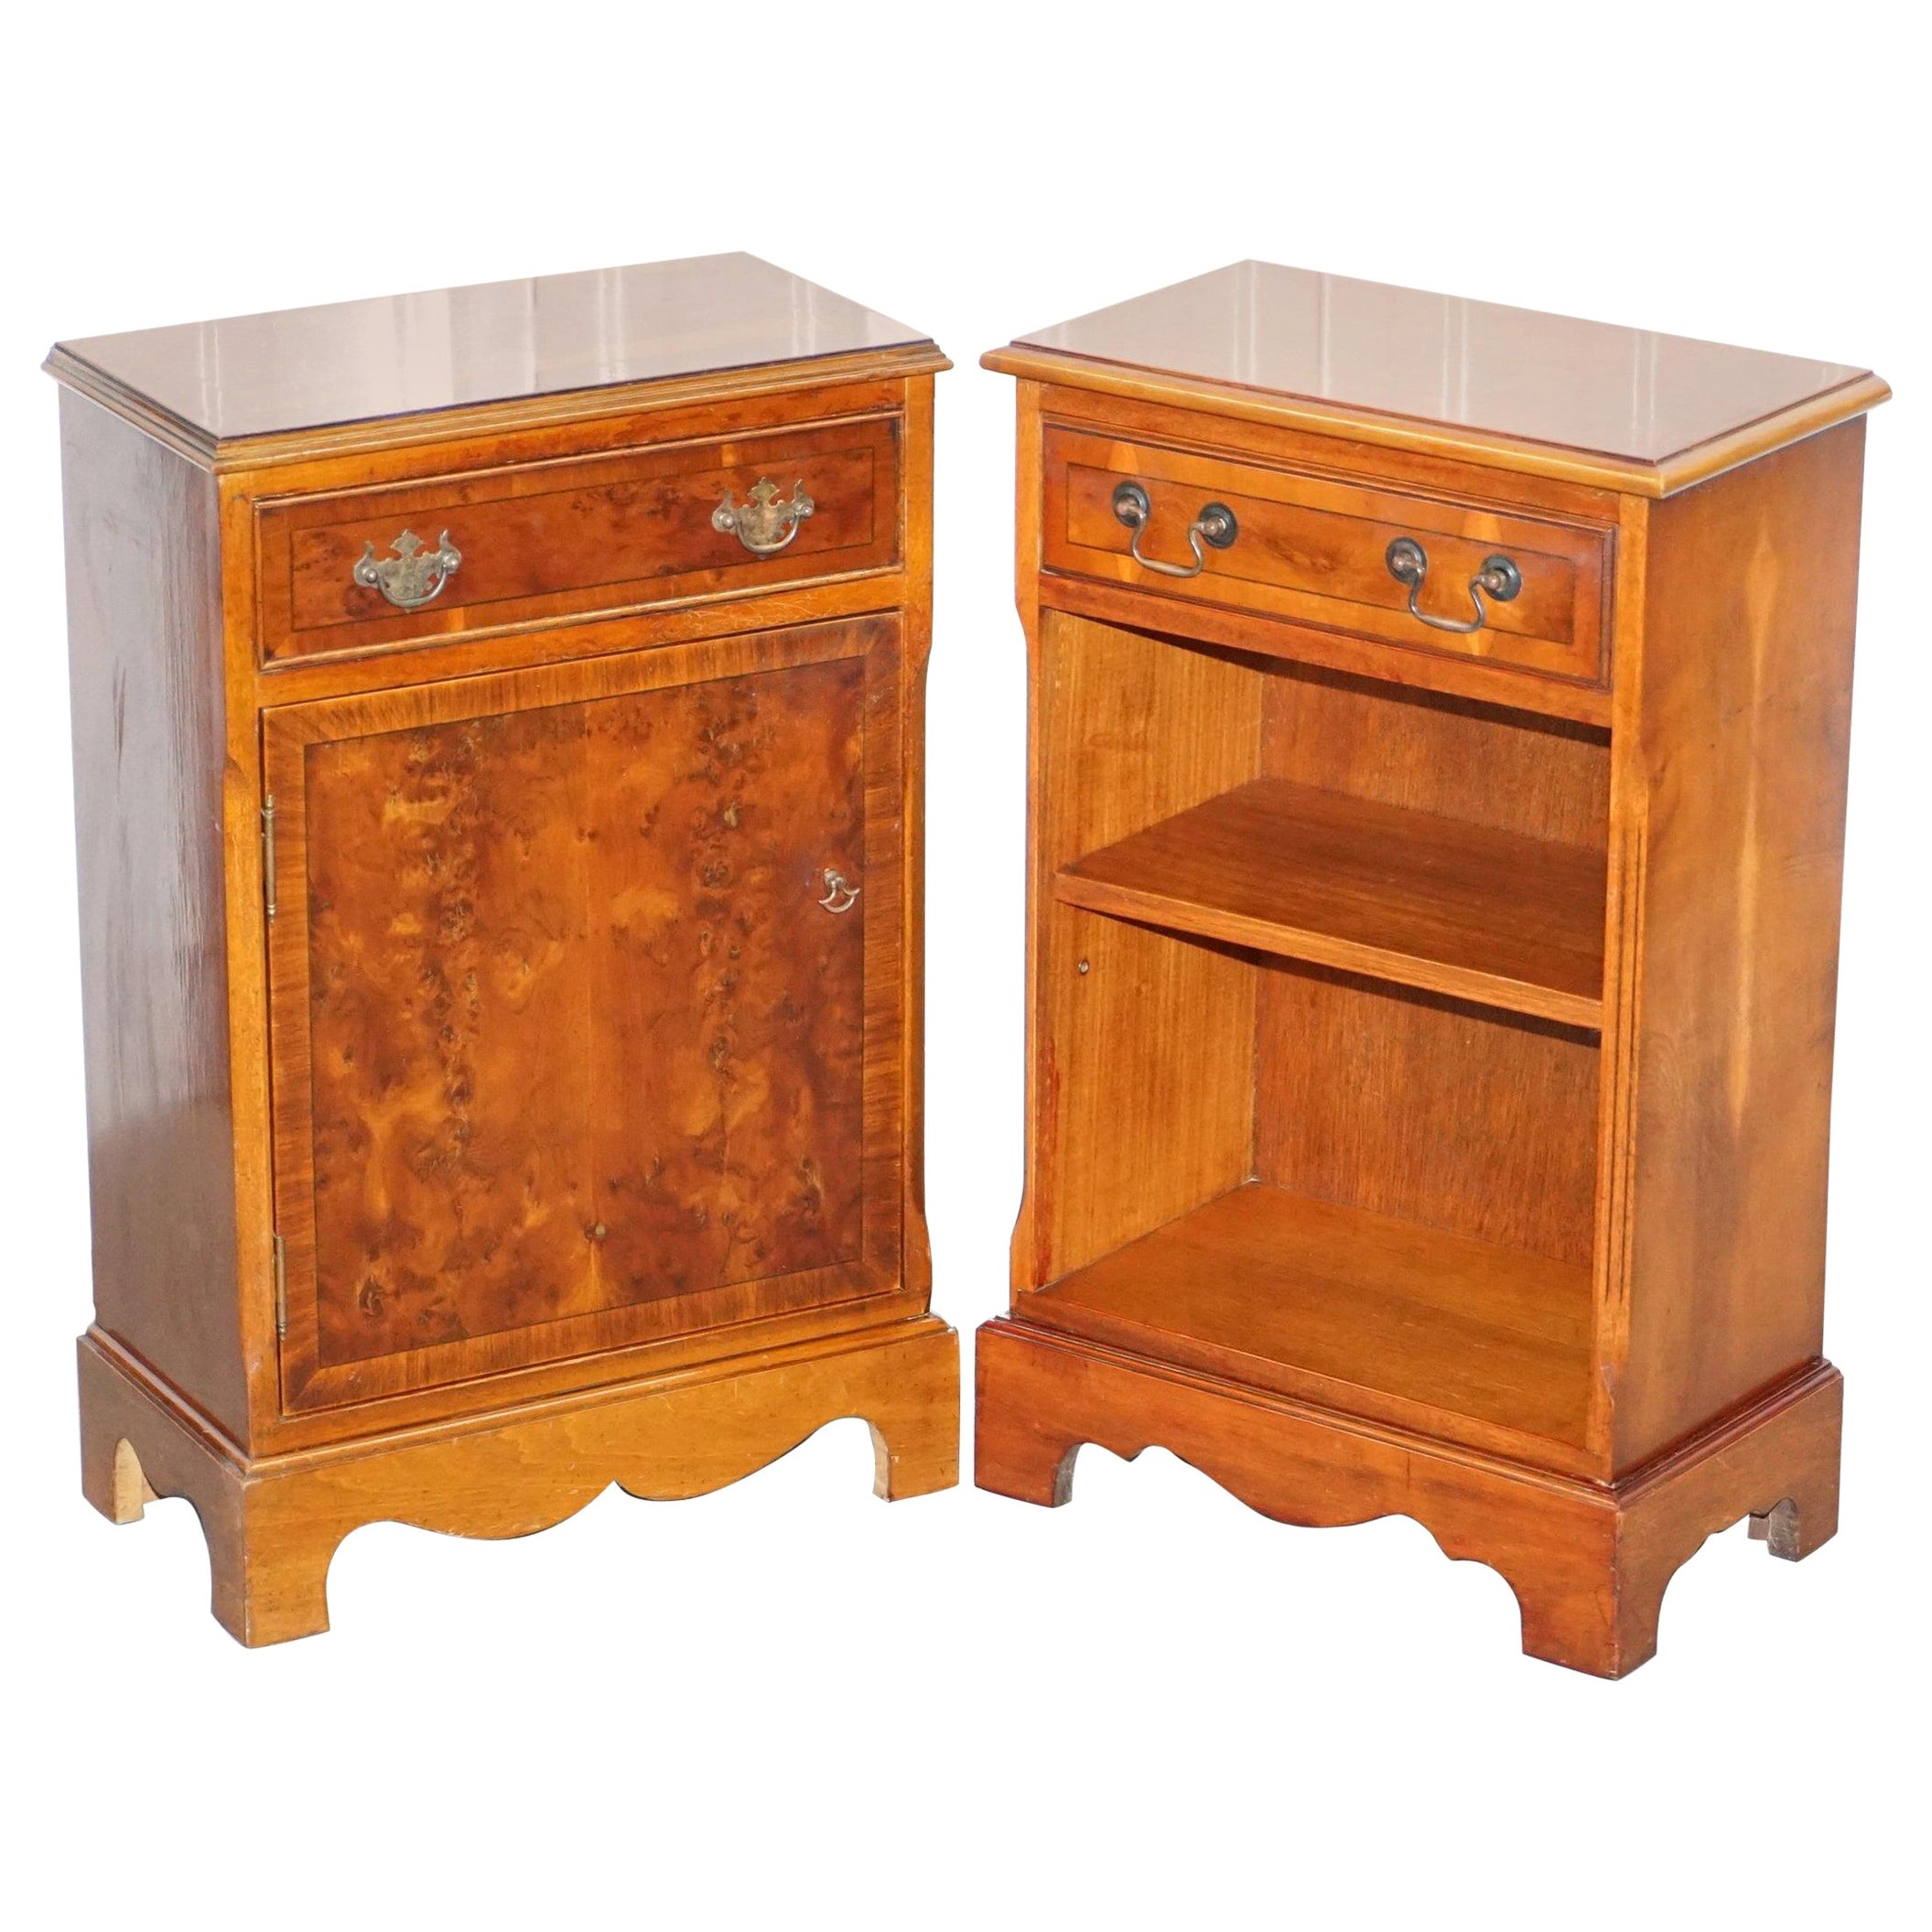 Pair of Vintage Burl Yew Wood Lamp, End or Wine Table Cupboards with Drawers